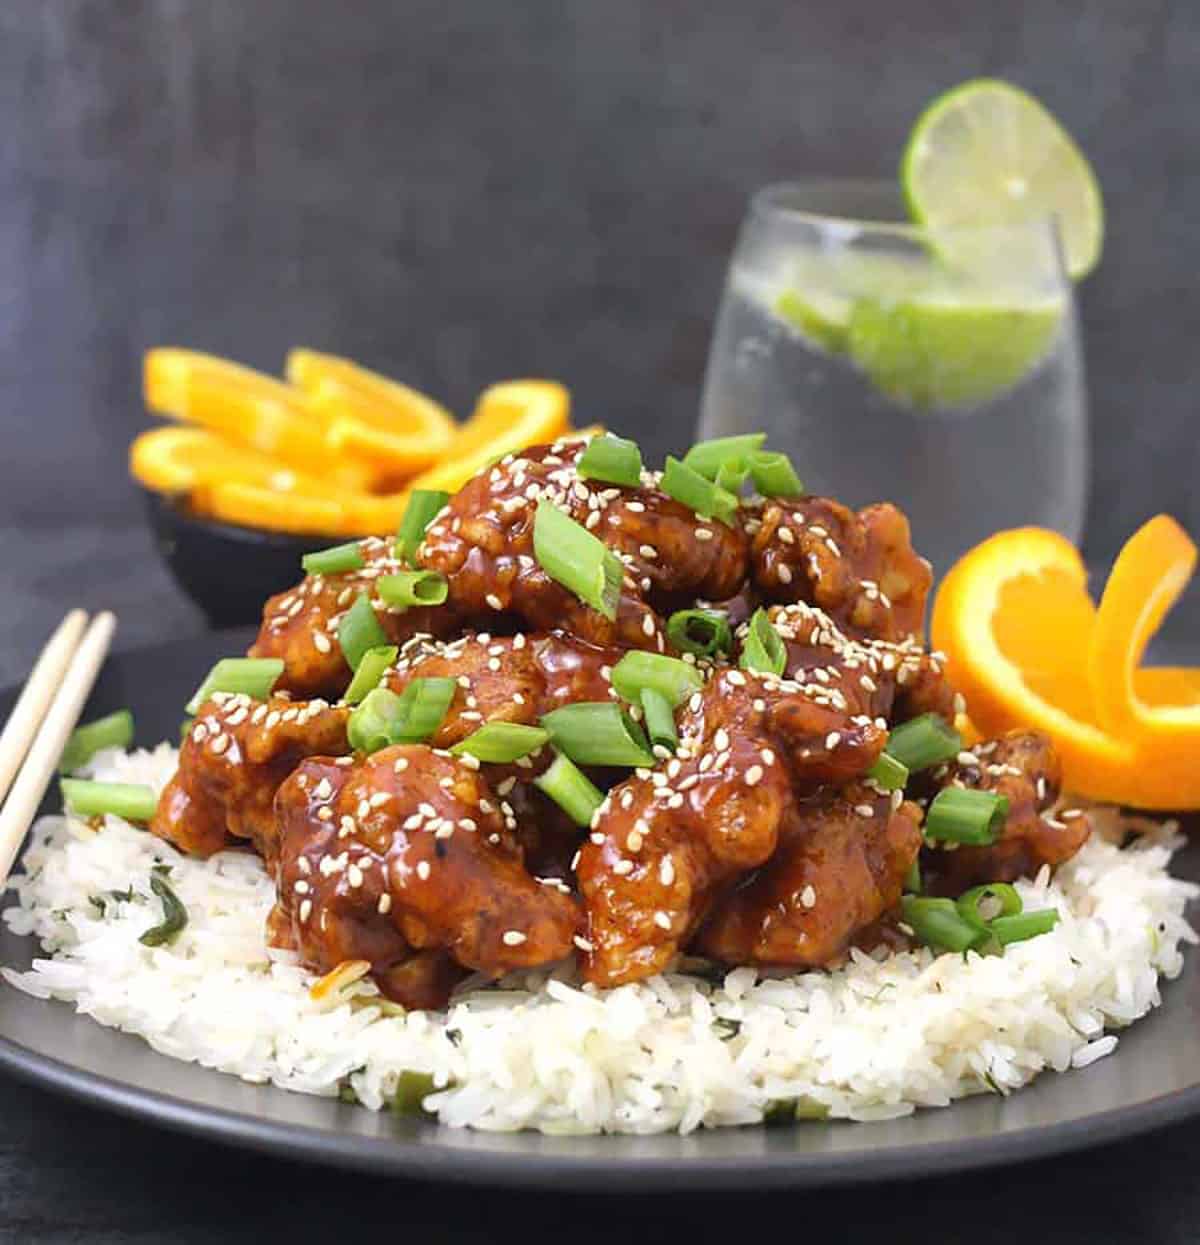 Orange chicken garnished with scallions and toasted sesame seeds served over a bed of steamed rice. In the background there is a glass of sparking water with lemon and orange wedges.